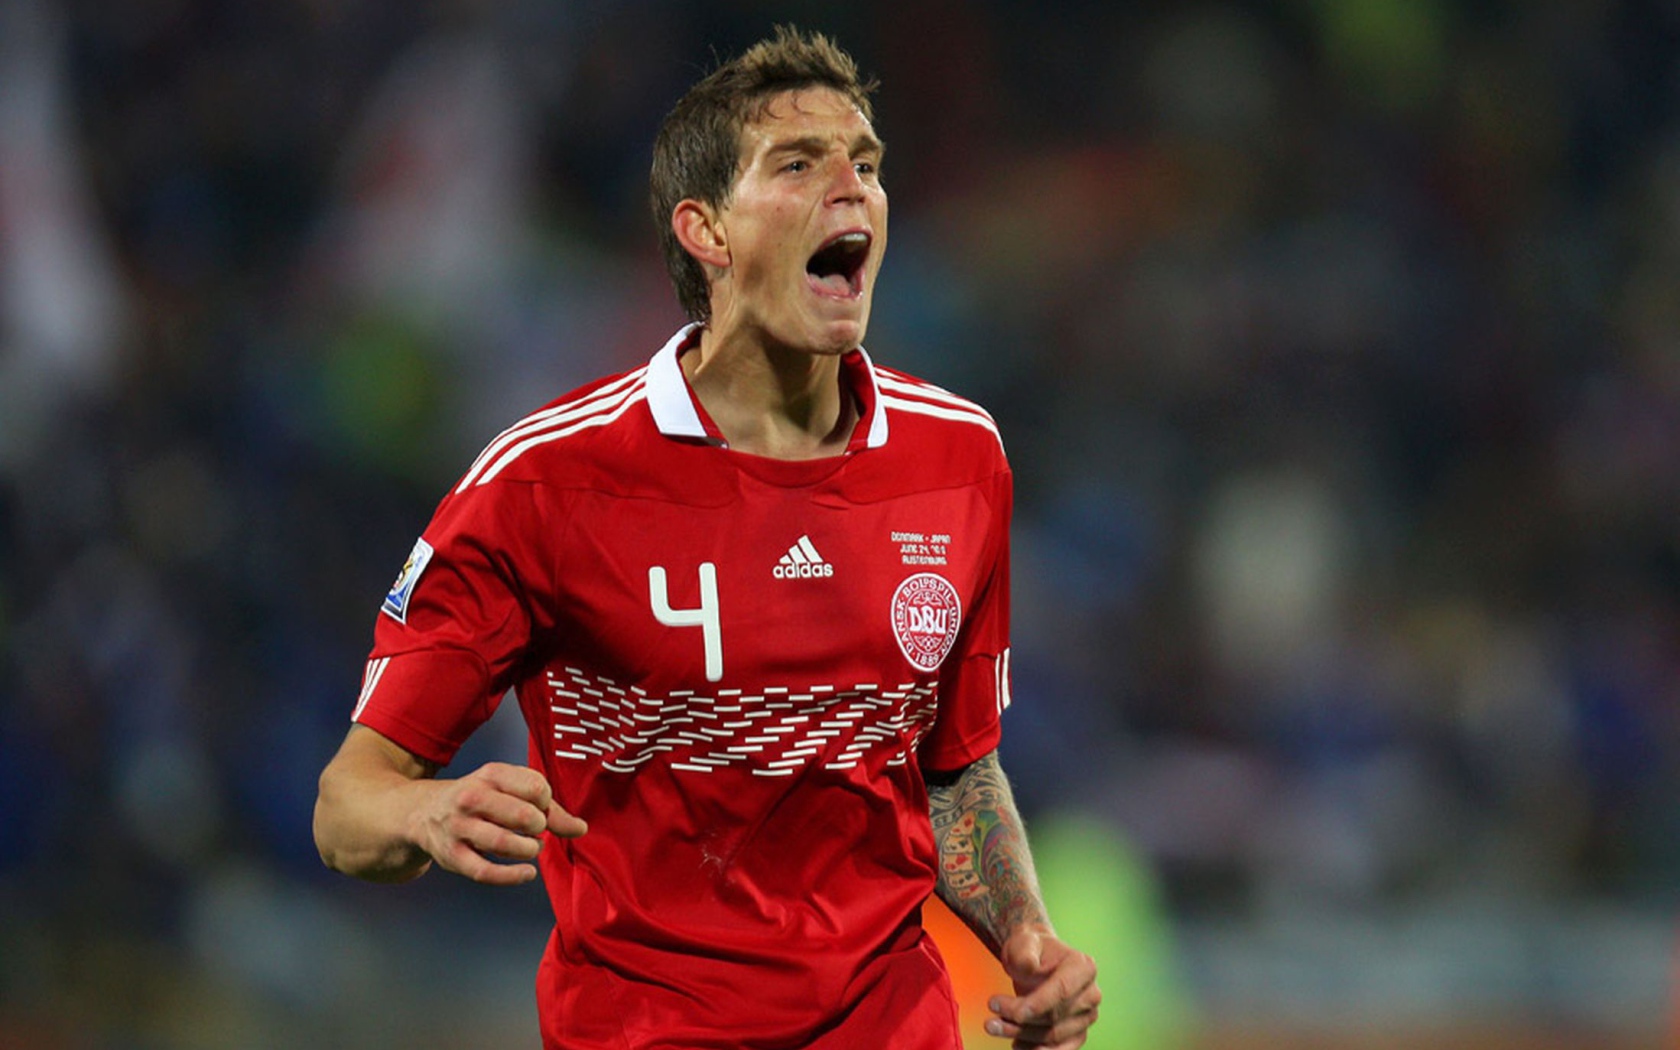 The best defender of Liverpool Daniel Agger